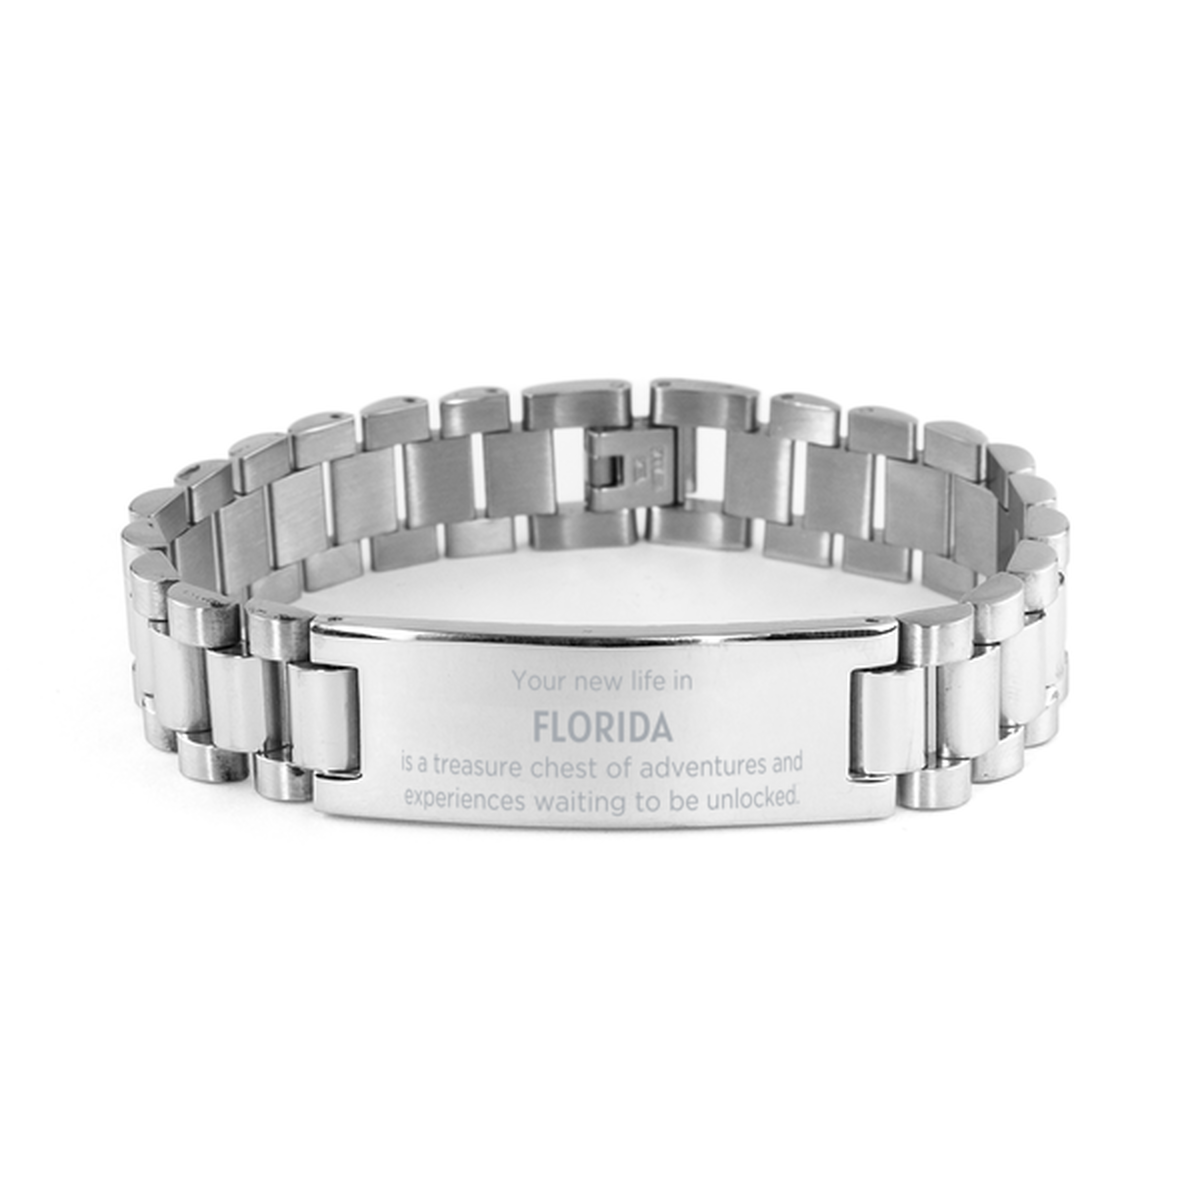 Moving to Florida Gifts, Your new life in Florida, Long Distance Florida Christmas Ladder Stainless Steel Bracelet For Men, Women, Friends, Coworkers